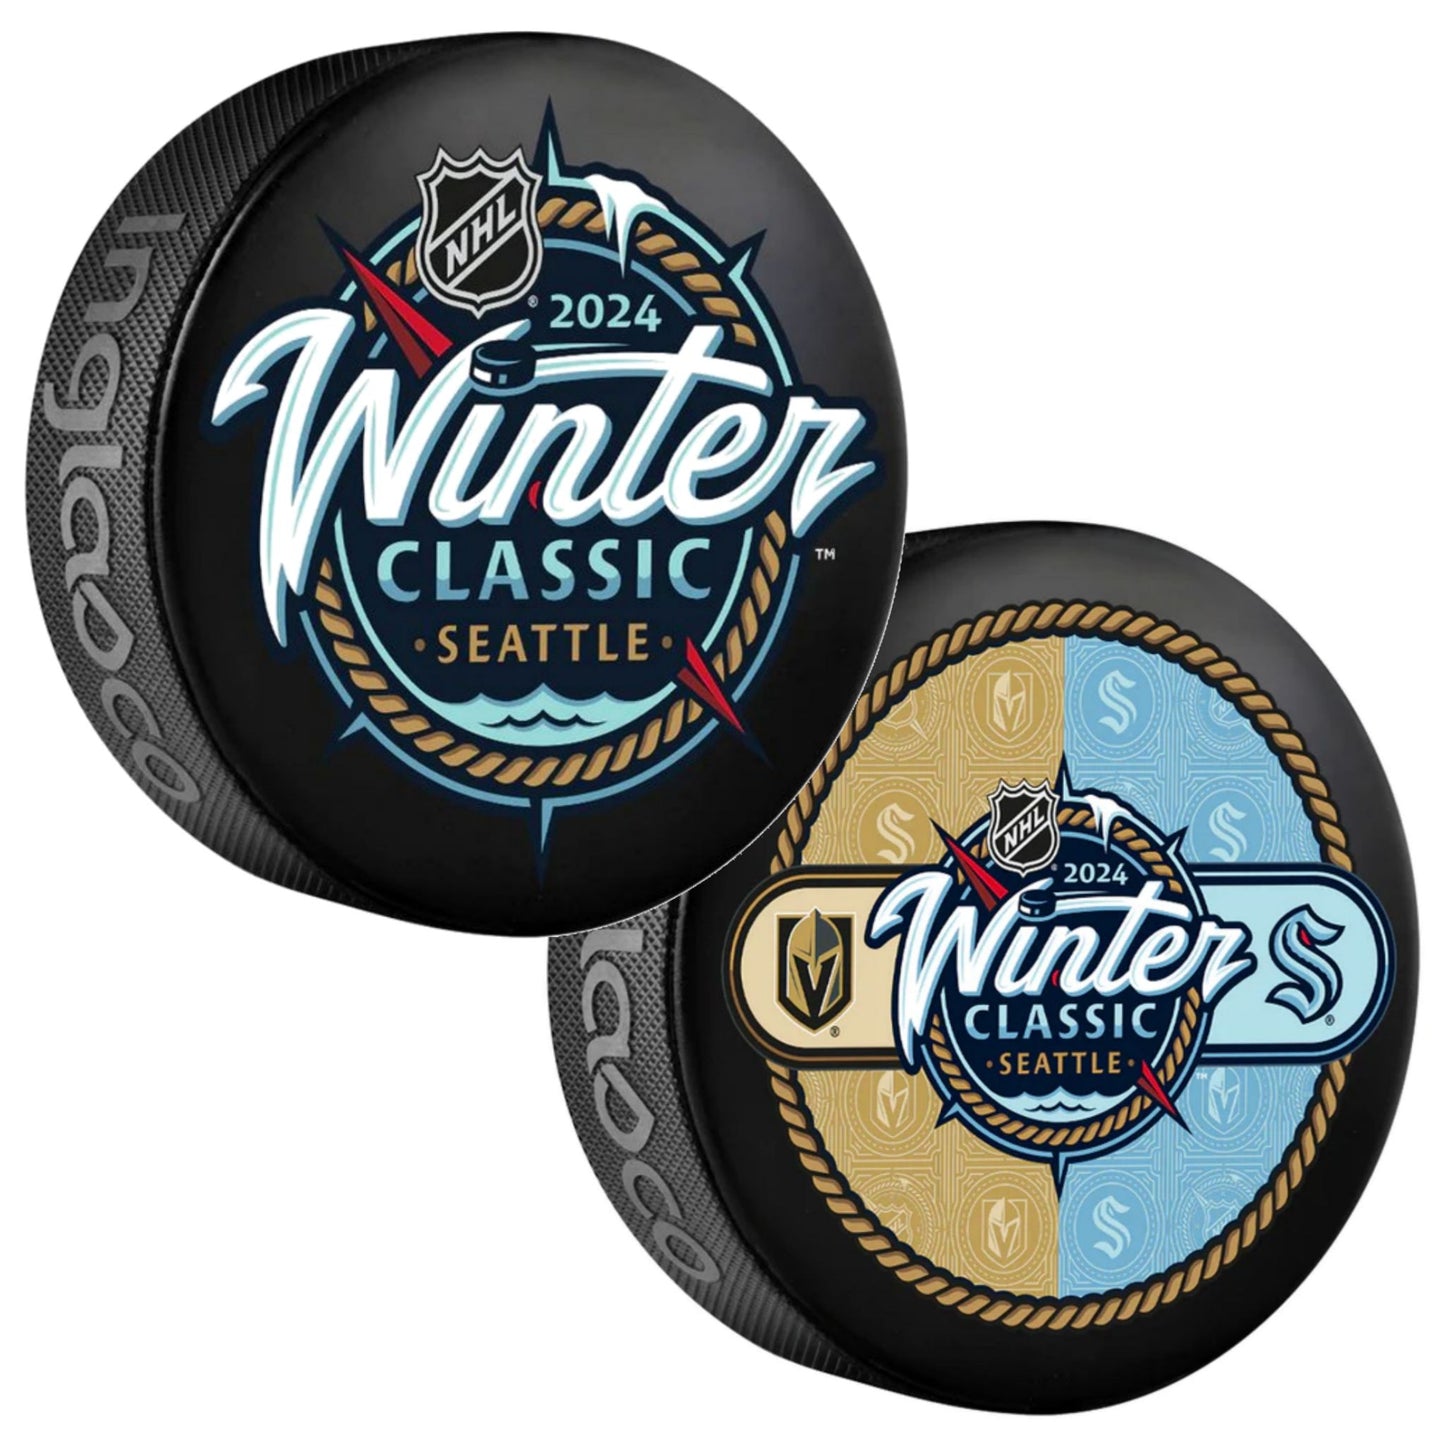 2024 NHL Winter Classic Souvenir and Dueling Collectible Hockey Pucks -Vegas vs Seattle-